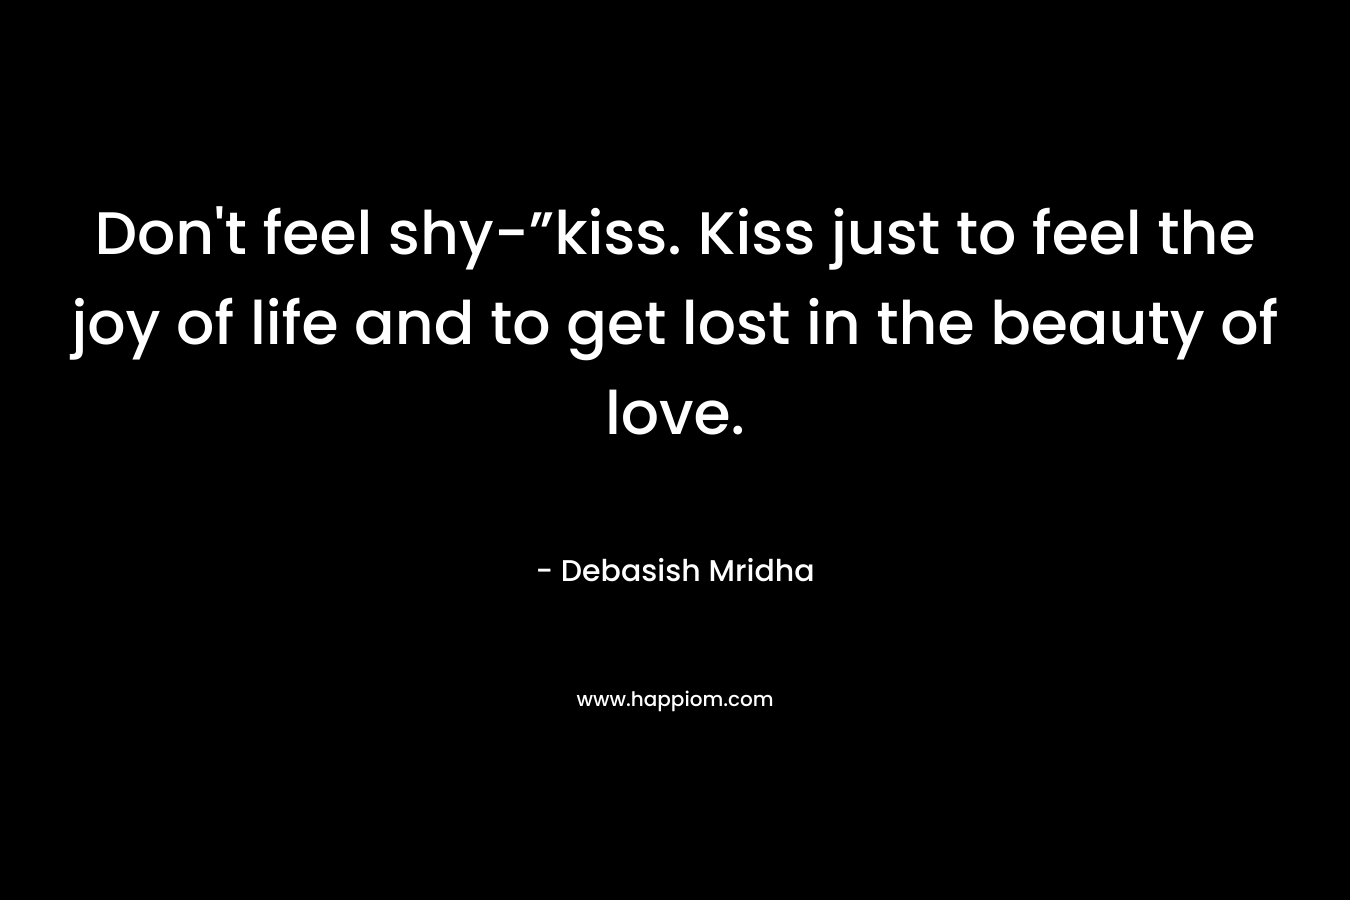 Don't feel shy-”kiss. Kiss just to feel the joy of life and to get lost in the beauty of love.